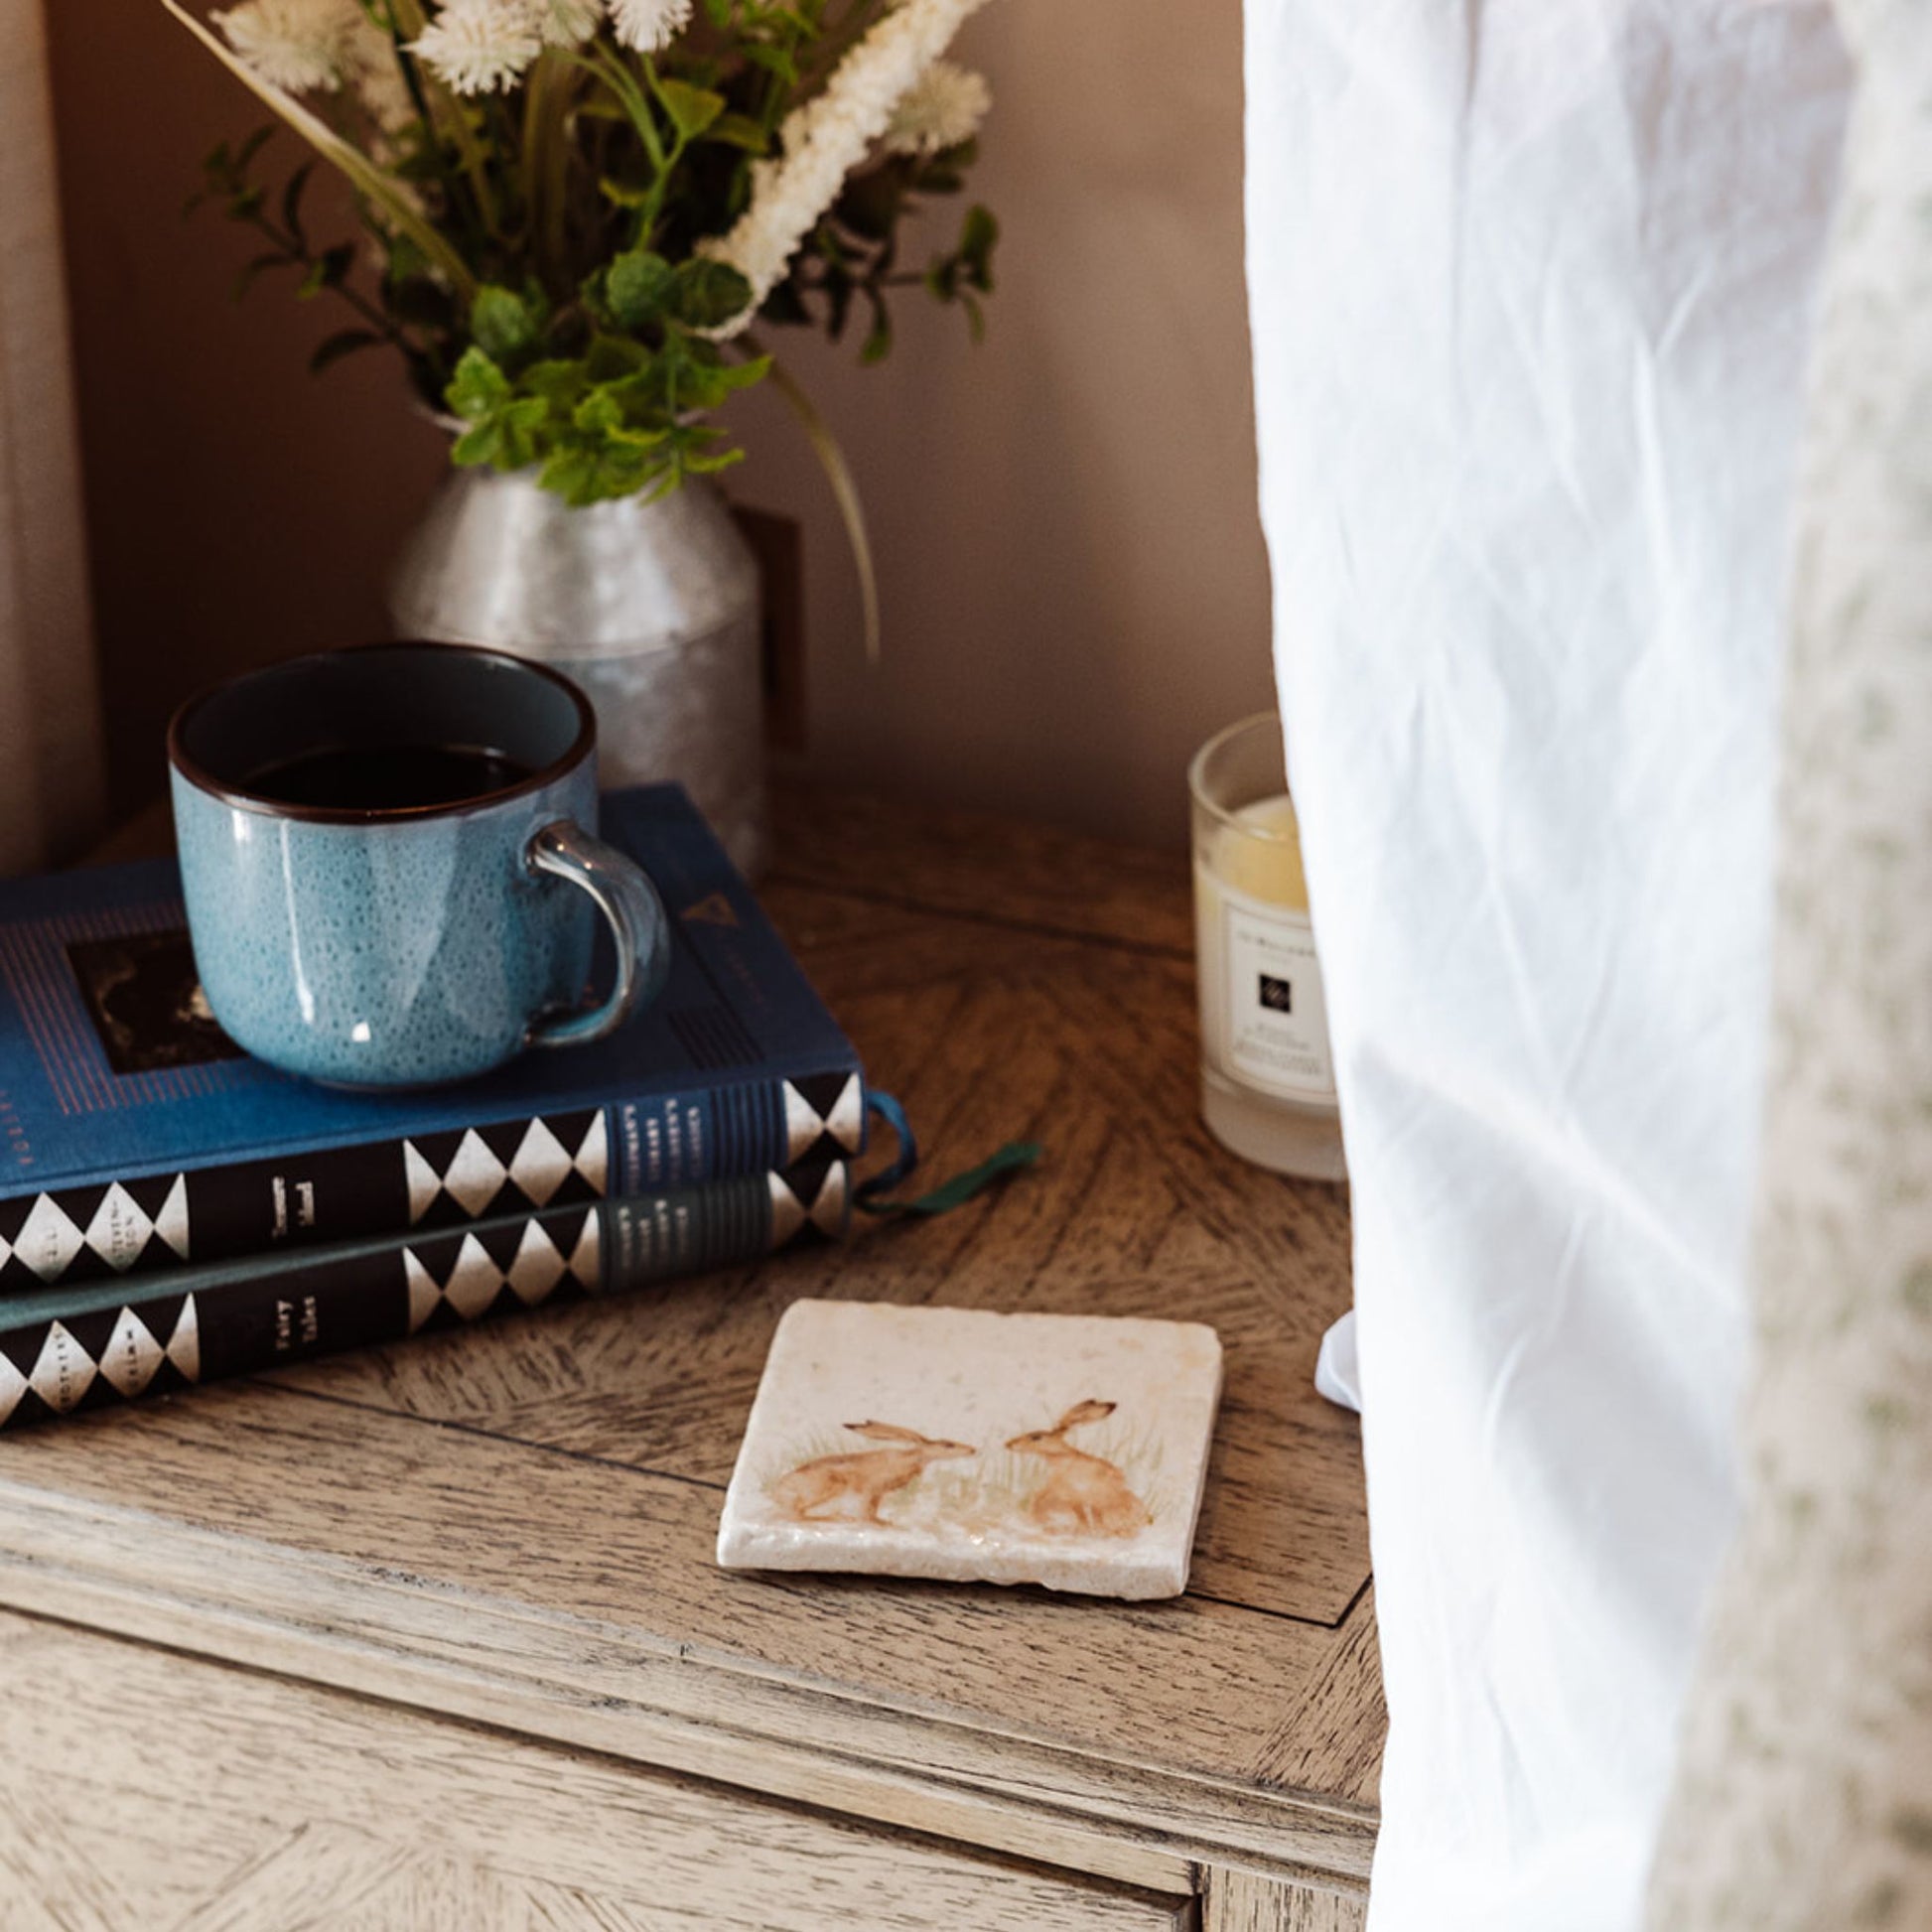 A square marble coaster on a bedside table next to a cup of coffee and a pile of books. The coaster has a watercolour design featuring two hares facing each other about to touch noses.